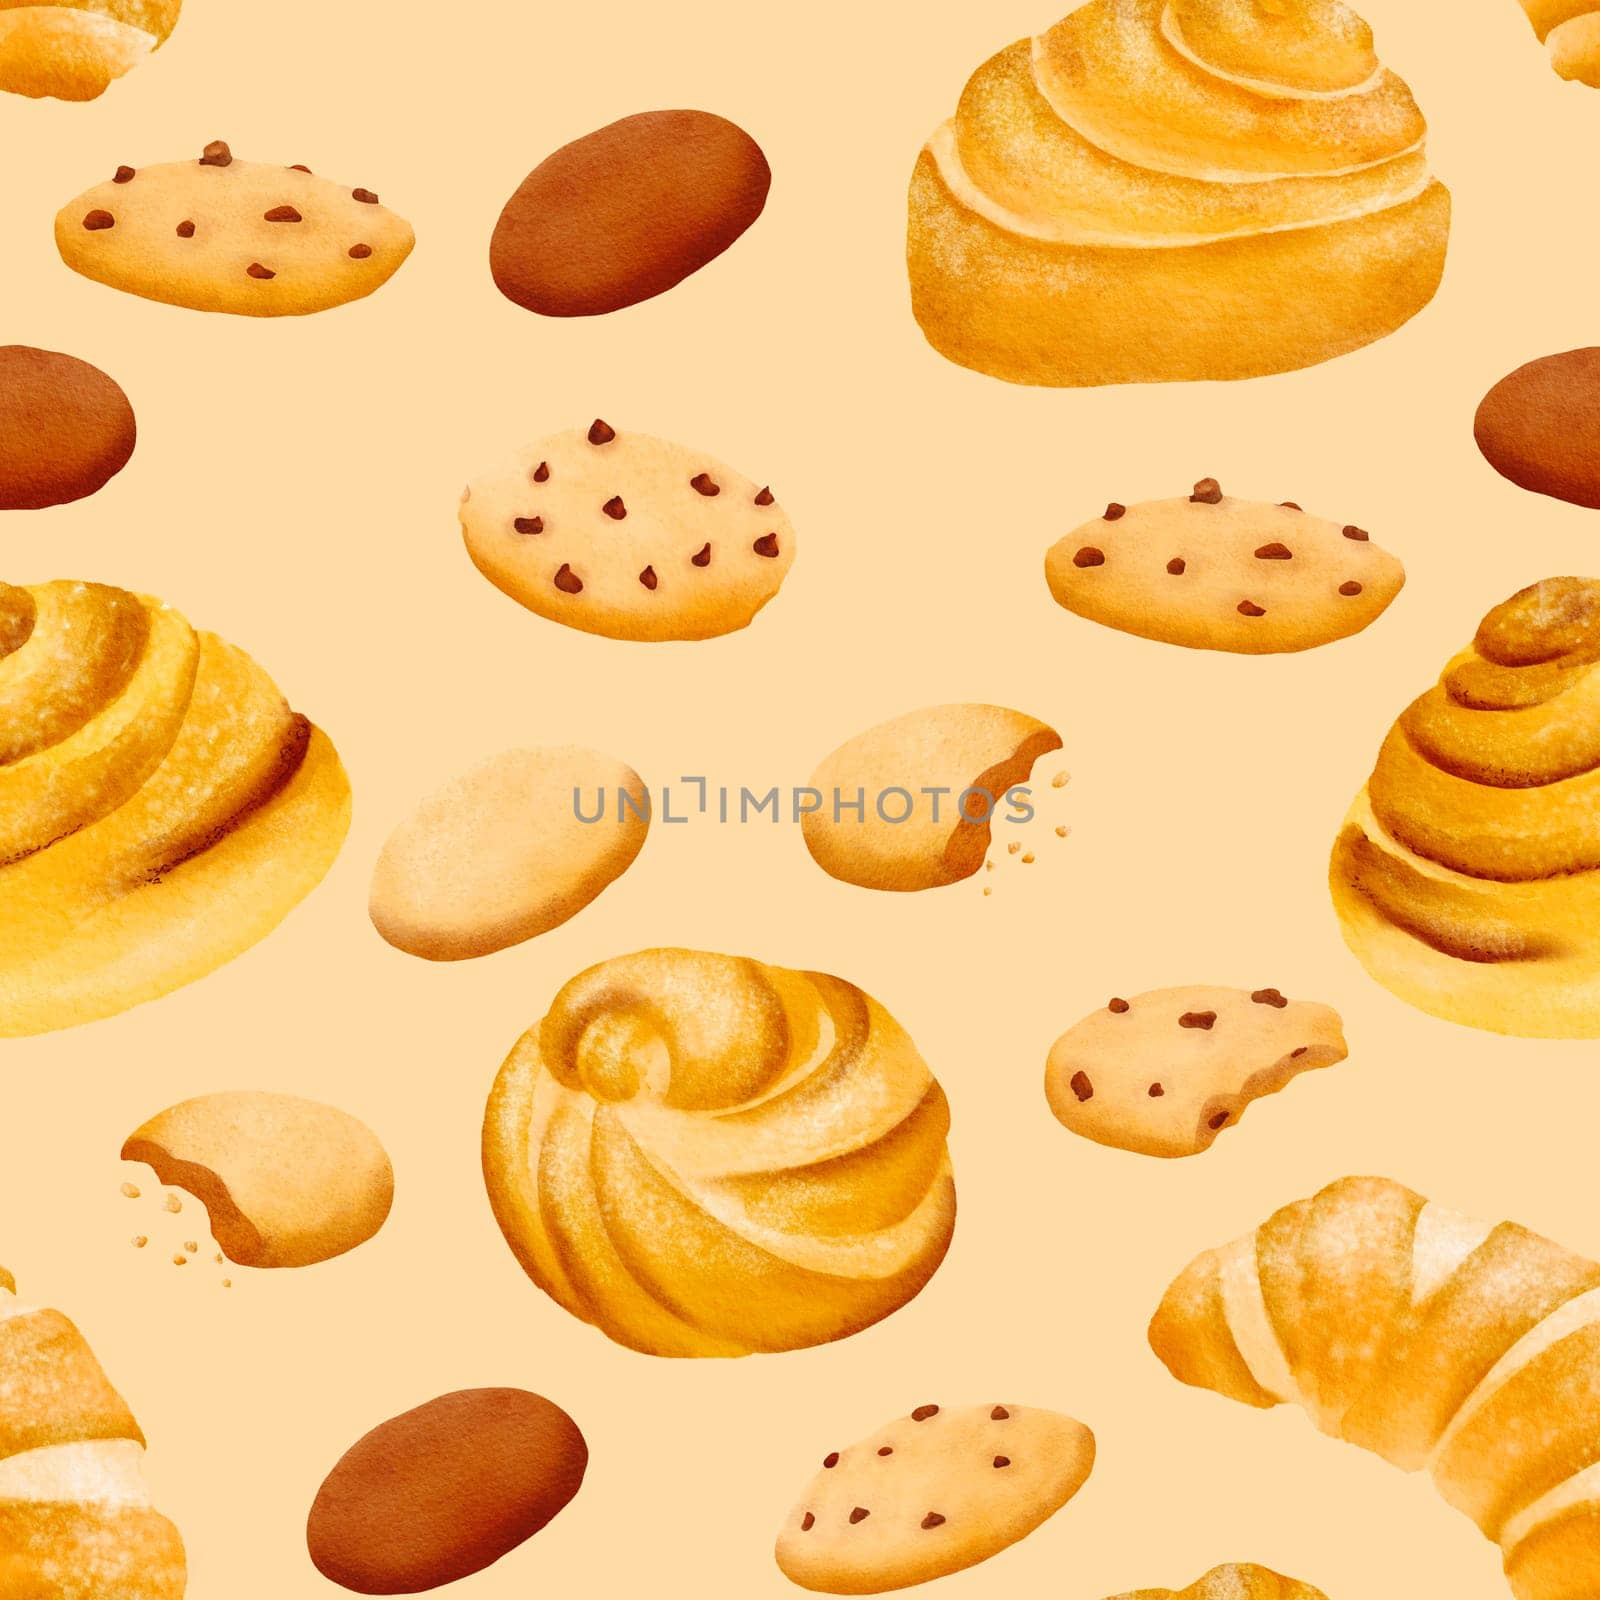 Seamless pattern of fresh delicious crispy sweet cookies and fresh fragrant buns. The pastry with pieces of chocolate and crumbs. yummy. Isolated hand drawn digital watercolor beige background.